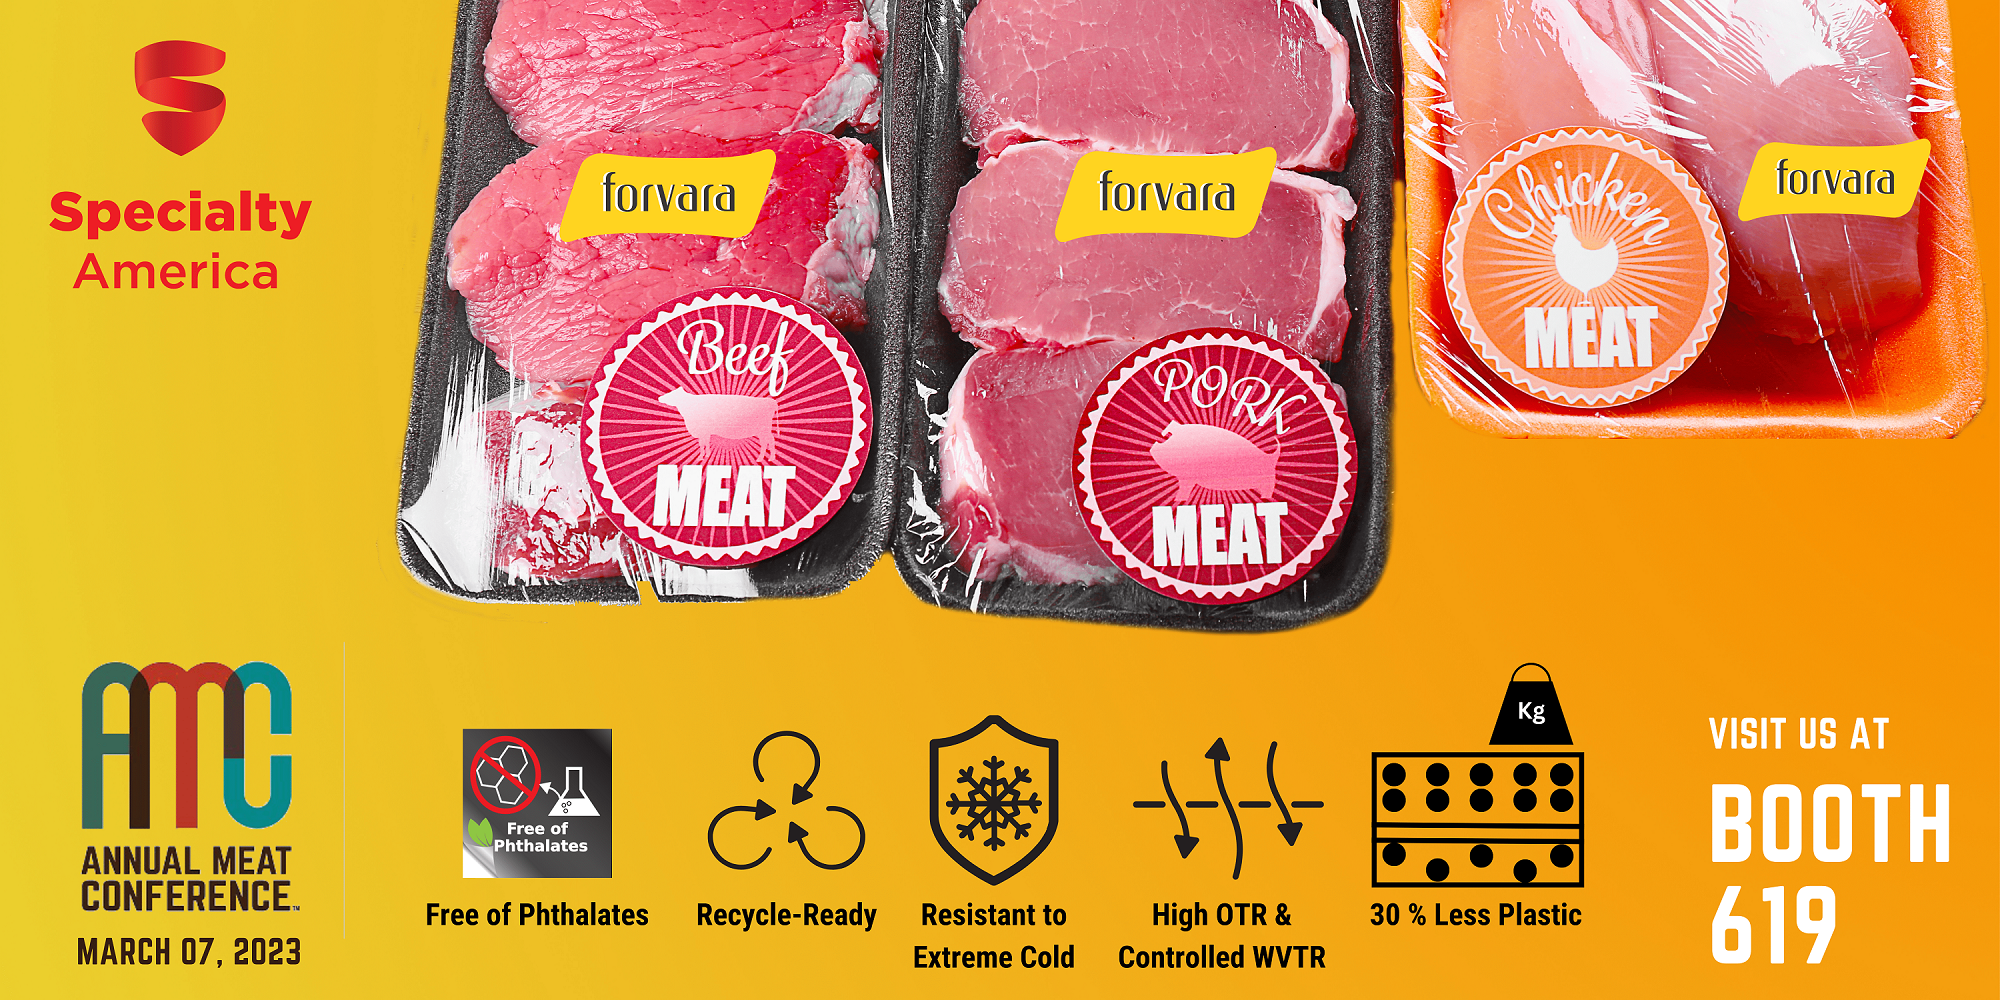 Forvara Meat Wrap films overwrapped Pork, Meat Poultry